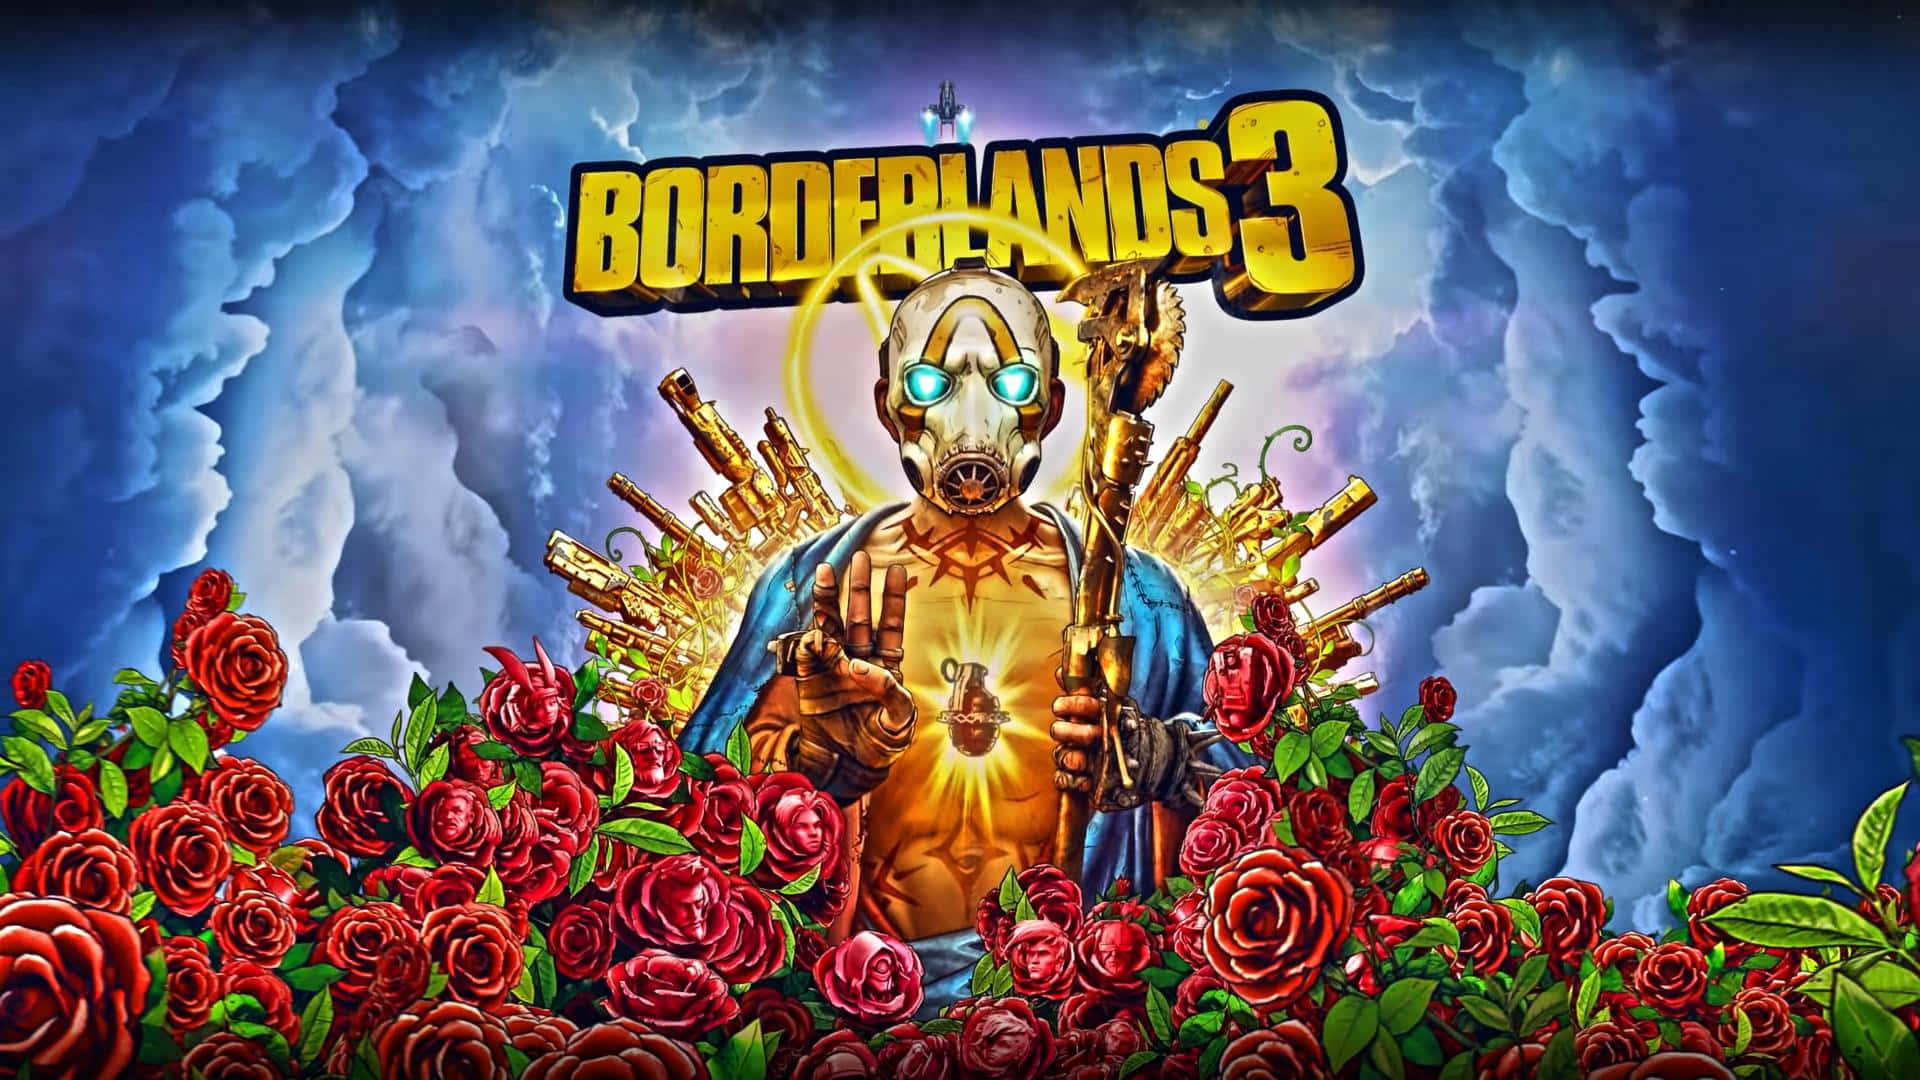 Face your enemies - Strike fear in them with Borderlands 3